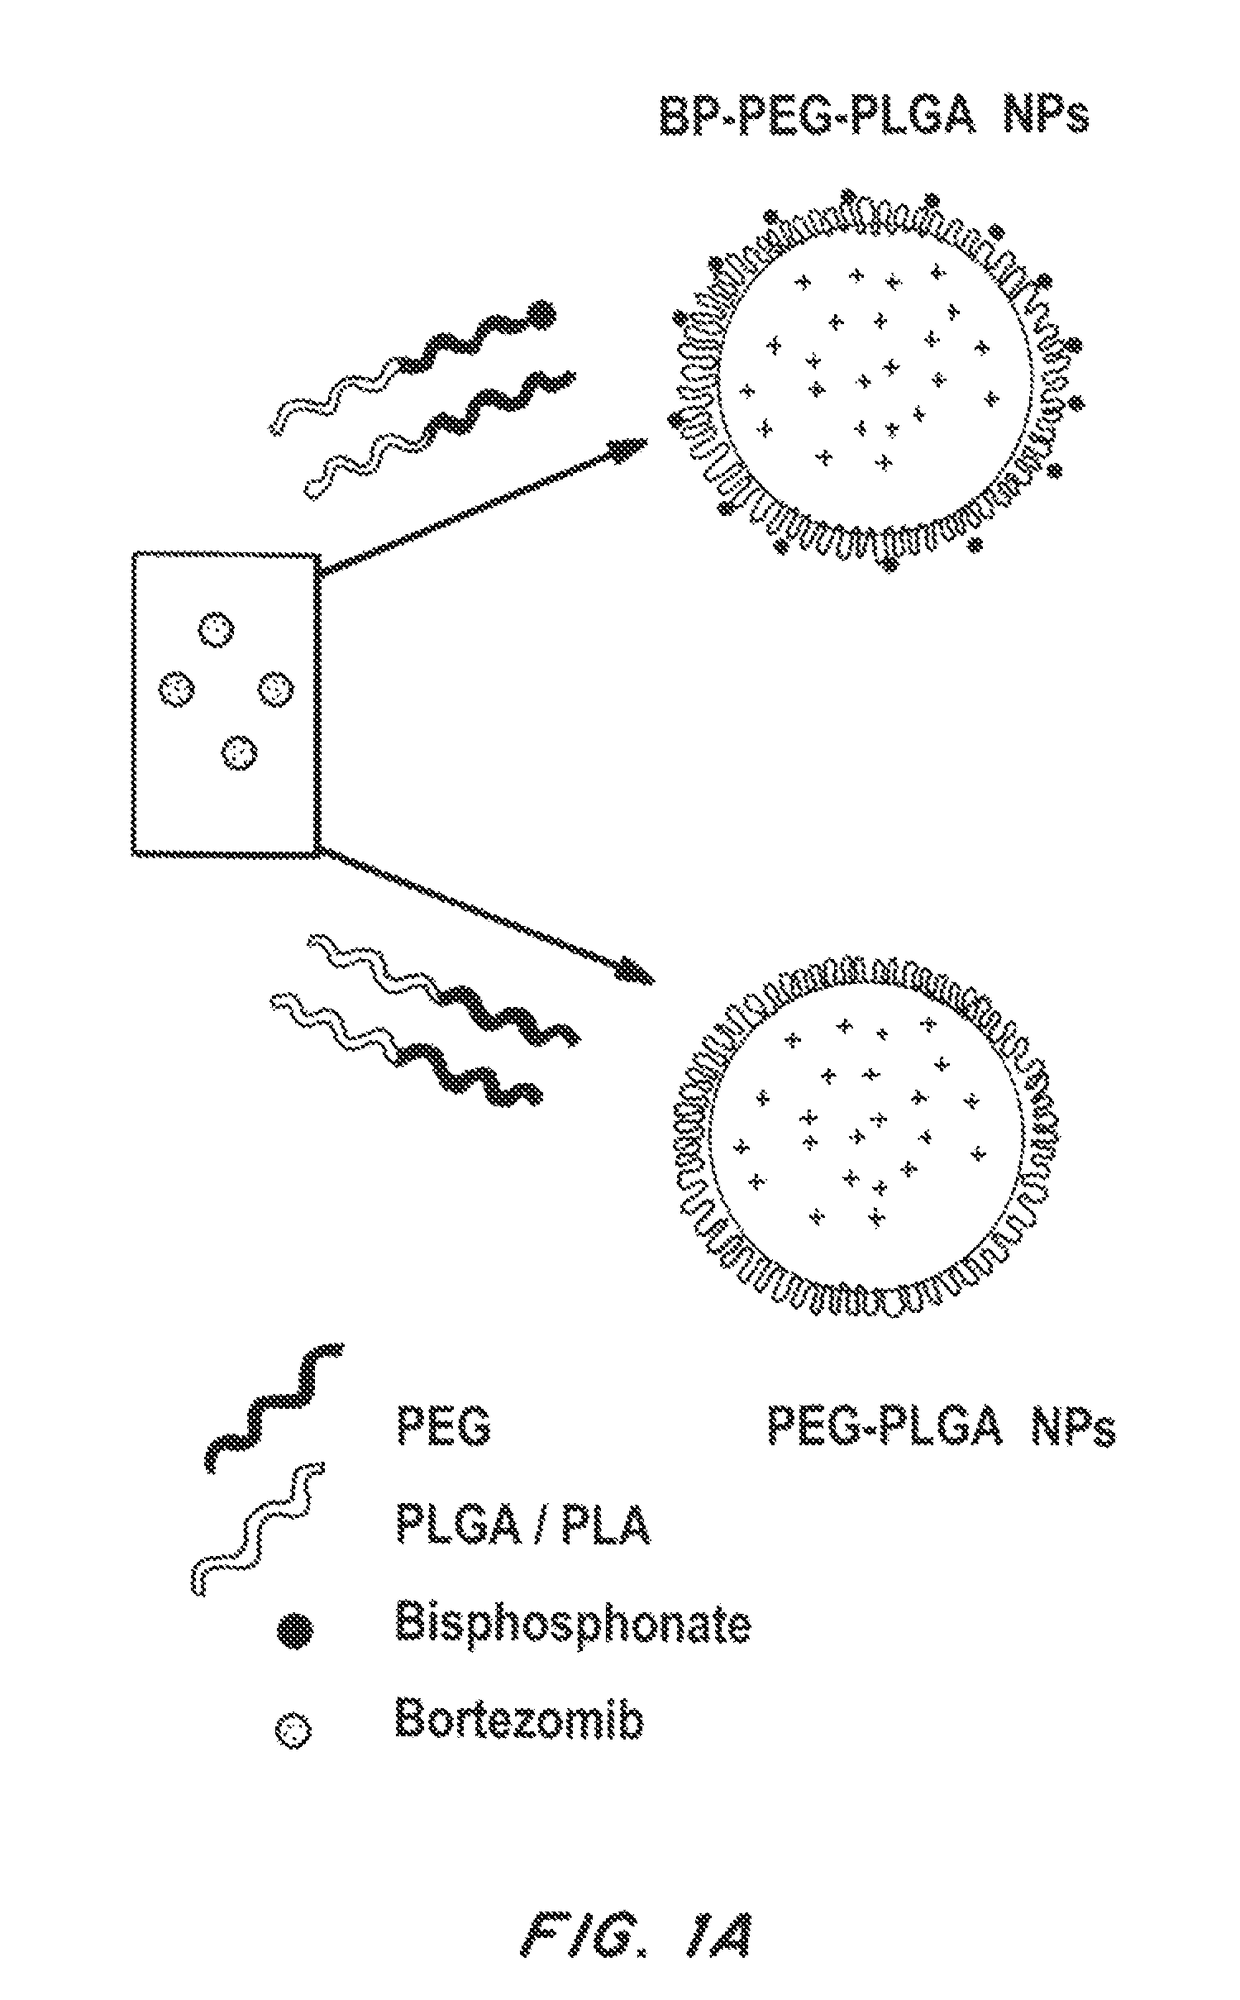 Bone and metal targeted polymeric nanoparticles